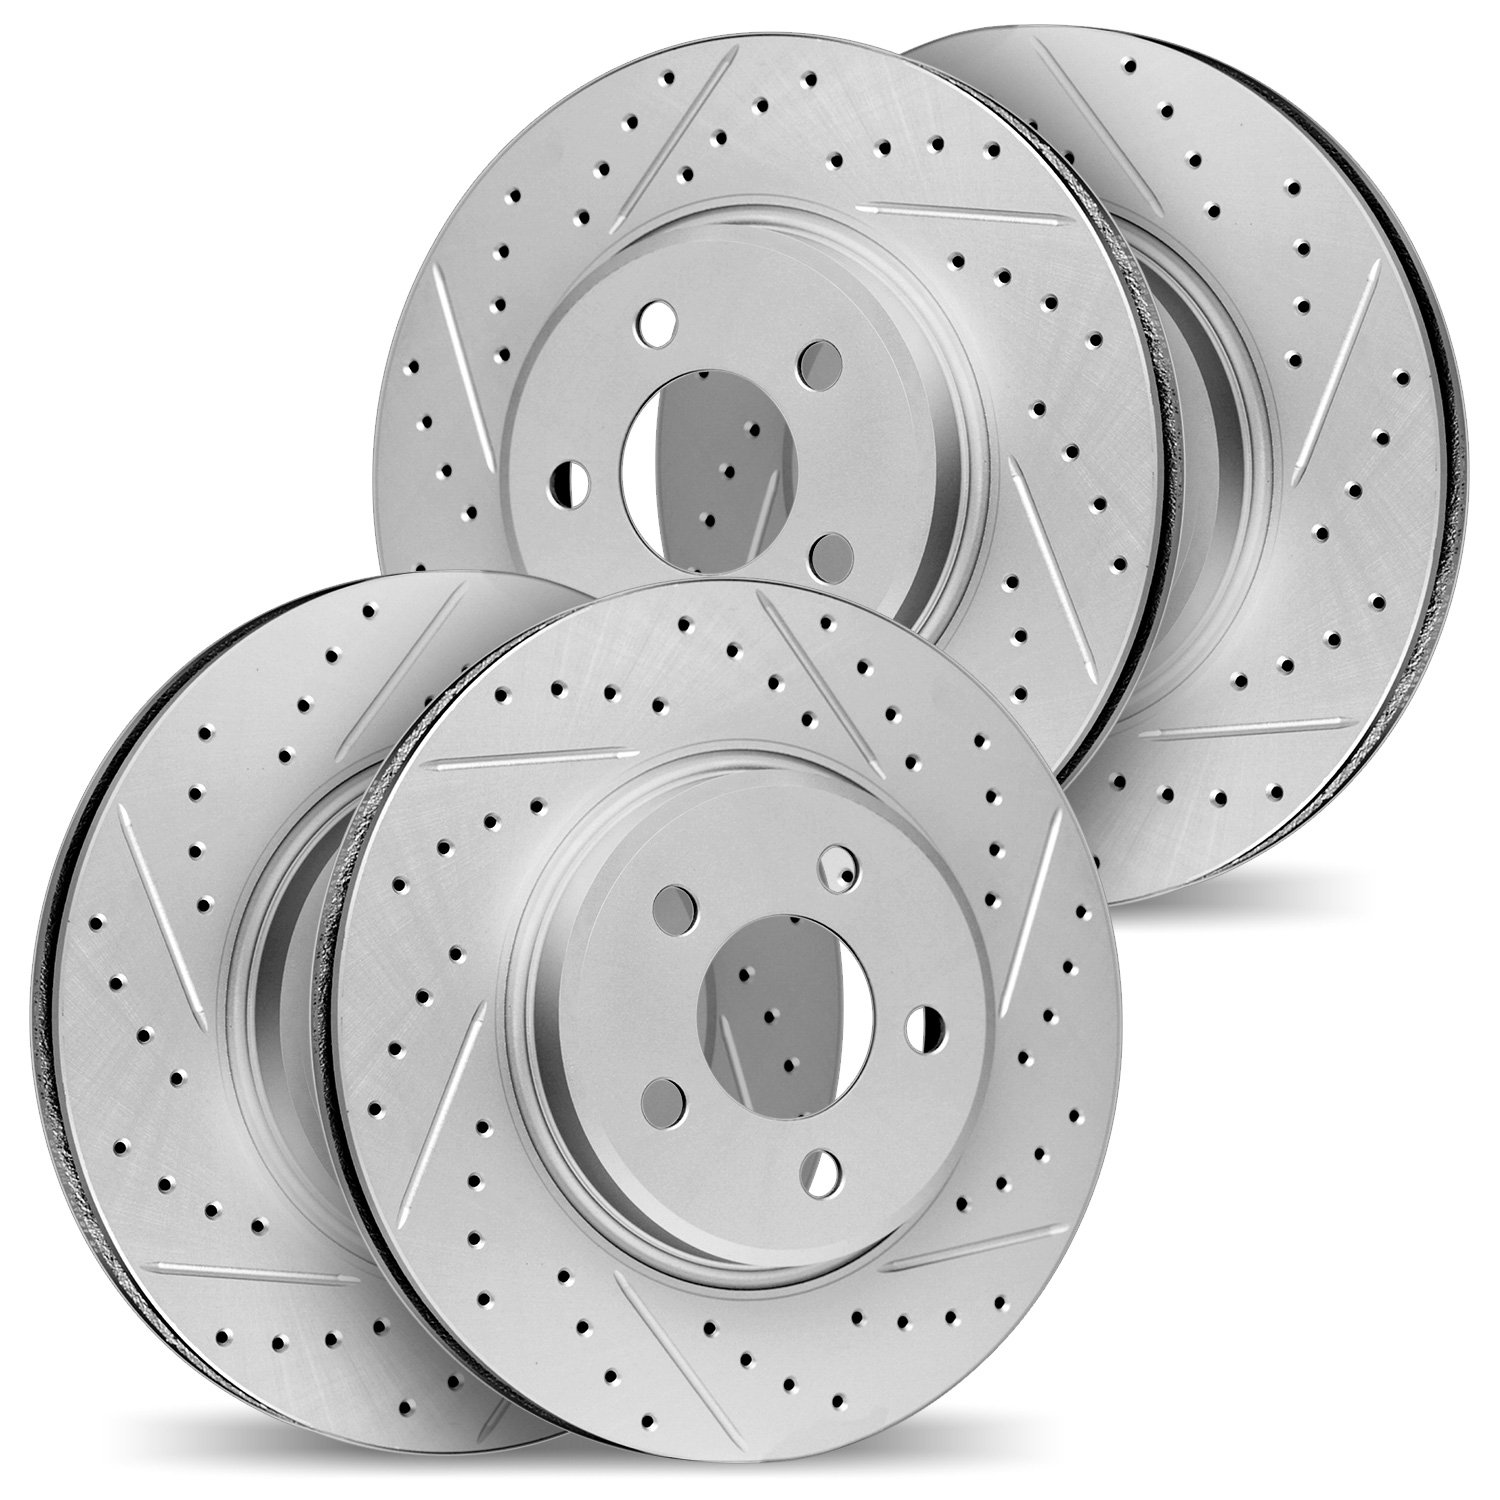 2004-11011 Geoperformance Drilled/Slotted Brake Rotors, 2005-2007 Land Rover, Position: Front and Rear